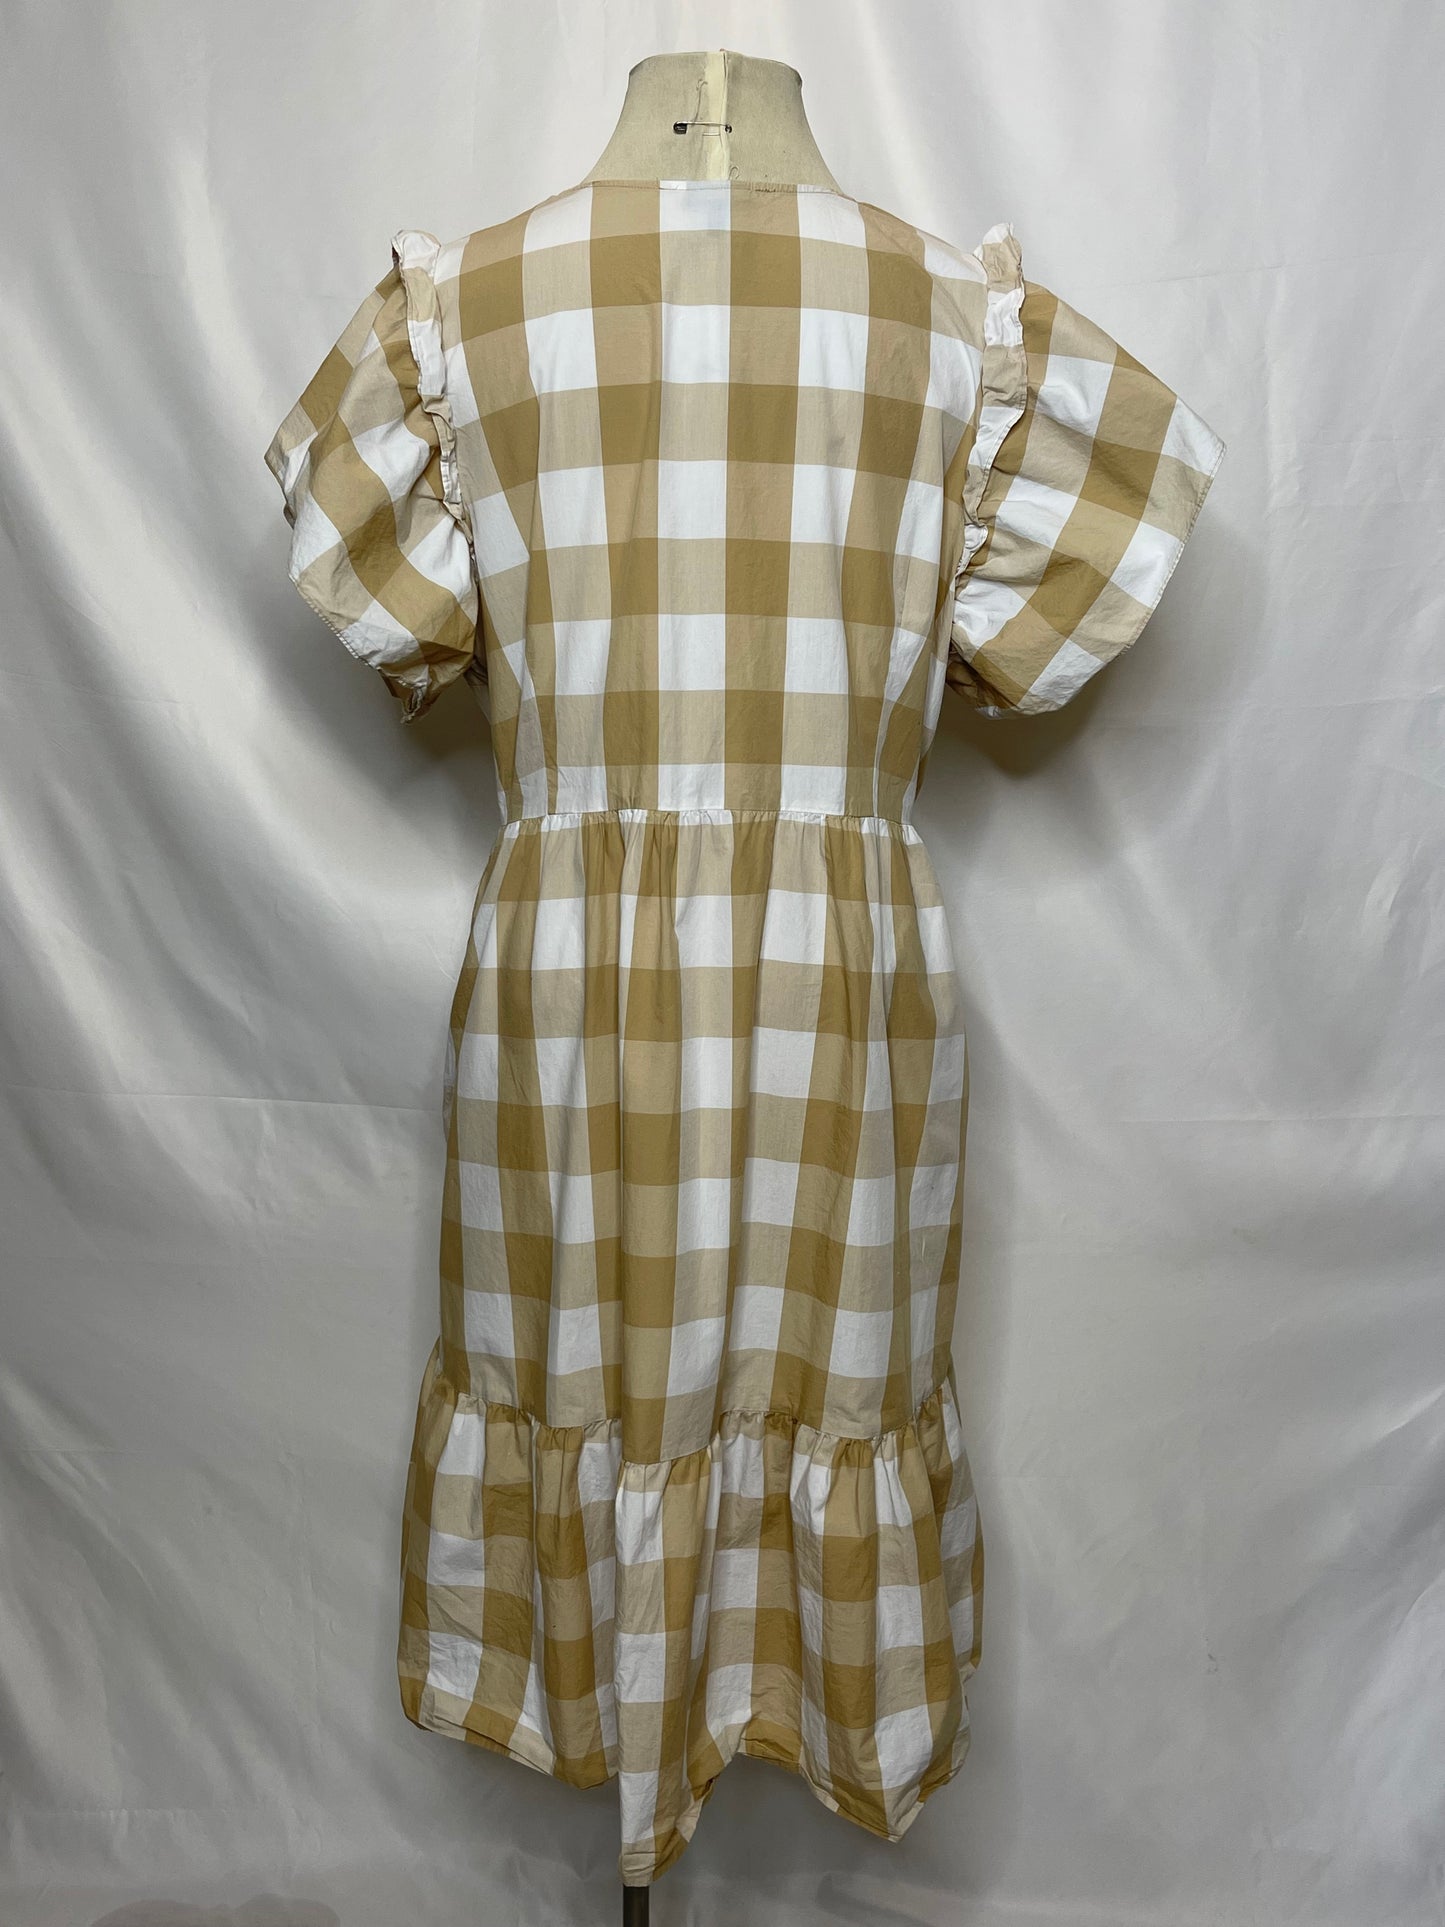 Target brand "Who What Where" Tan Plaid Oversized Dress